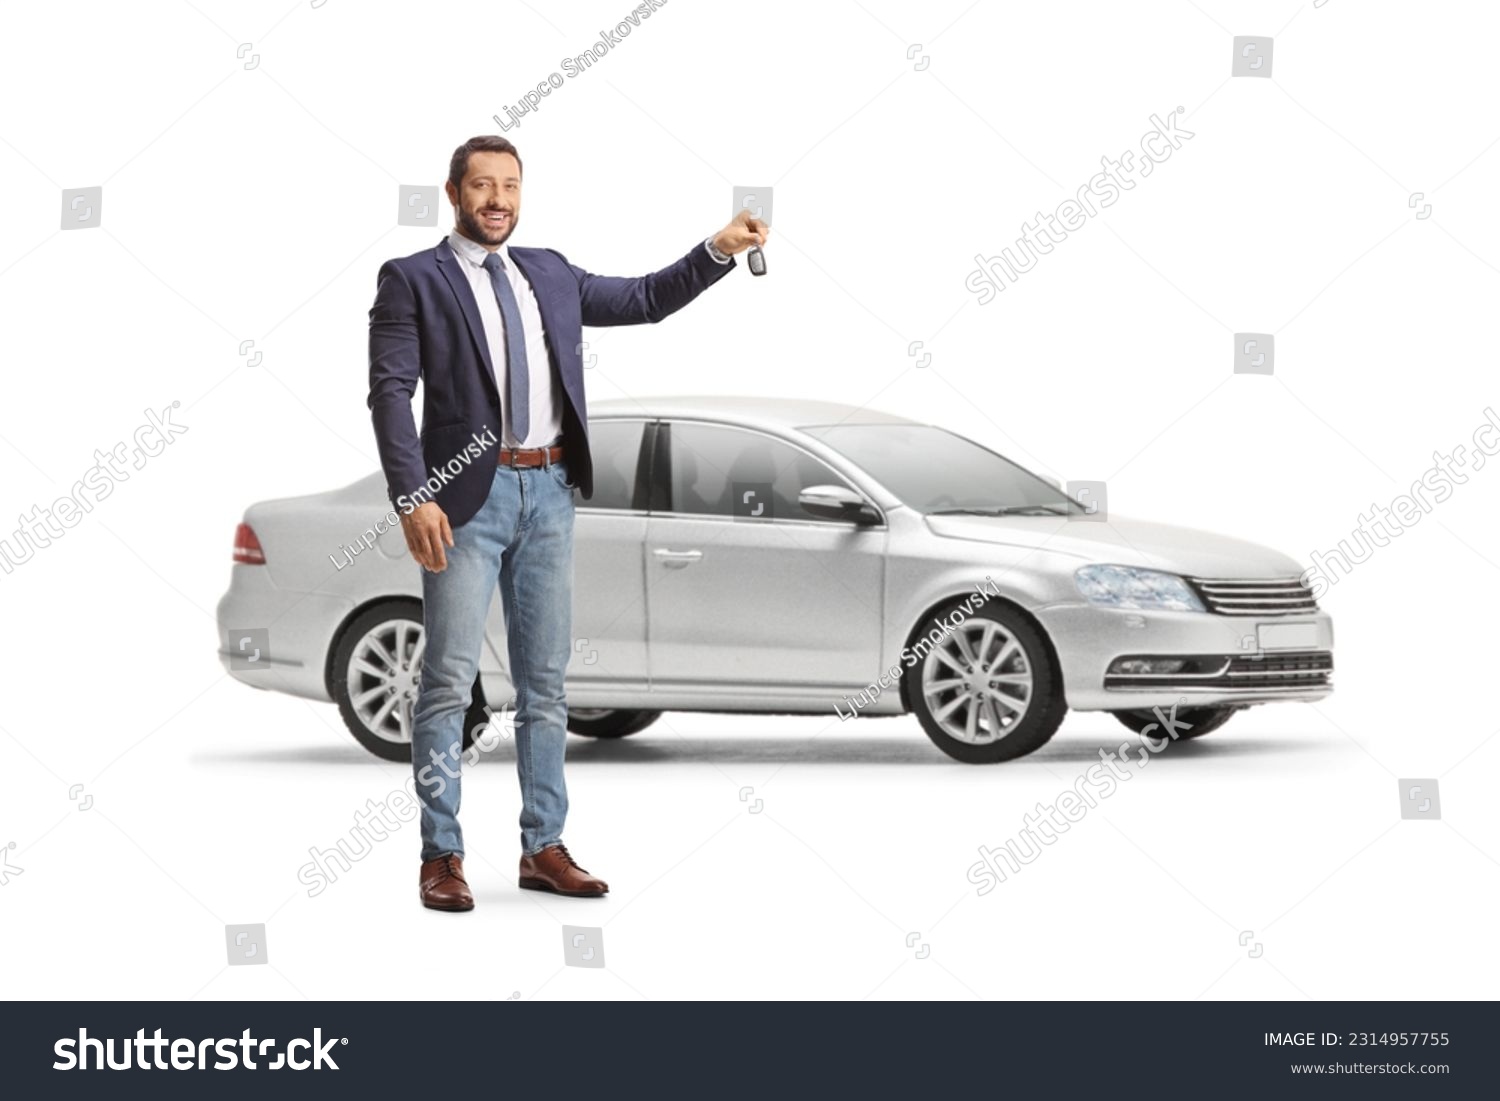 Smiling professional man holding a car key in front of a sliver car isolated on white background #2314957755